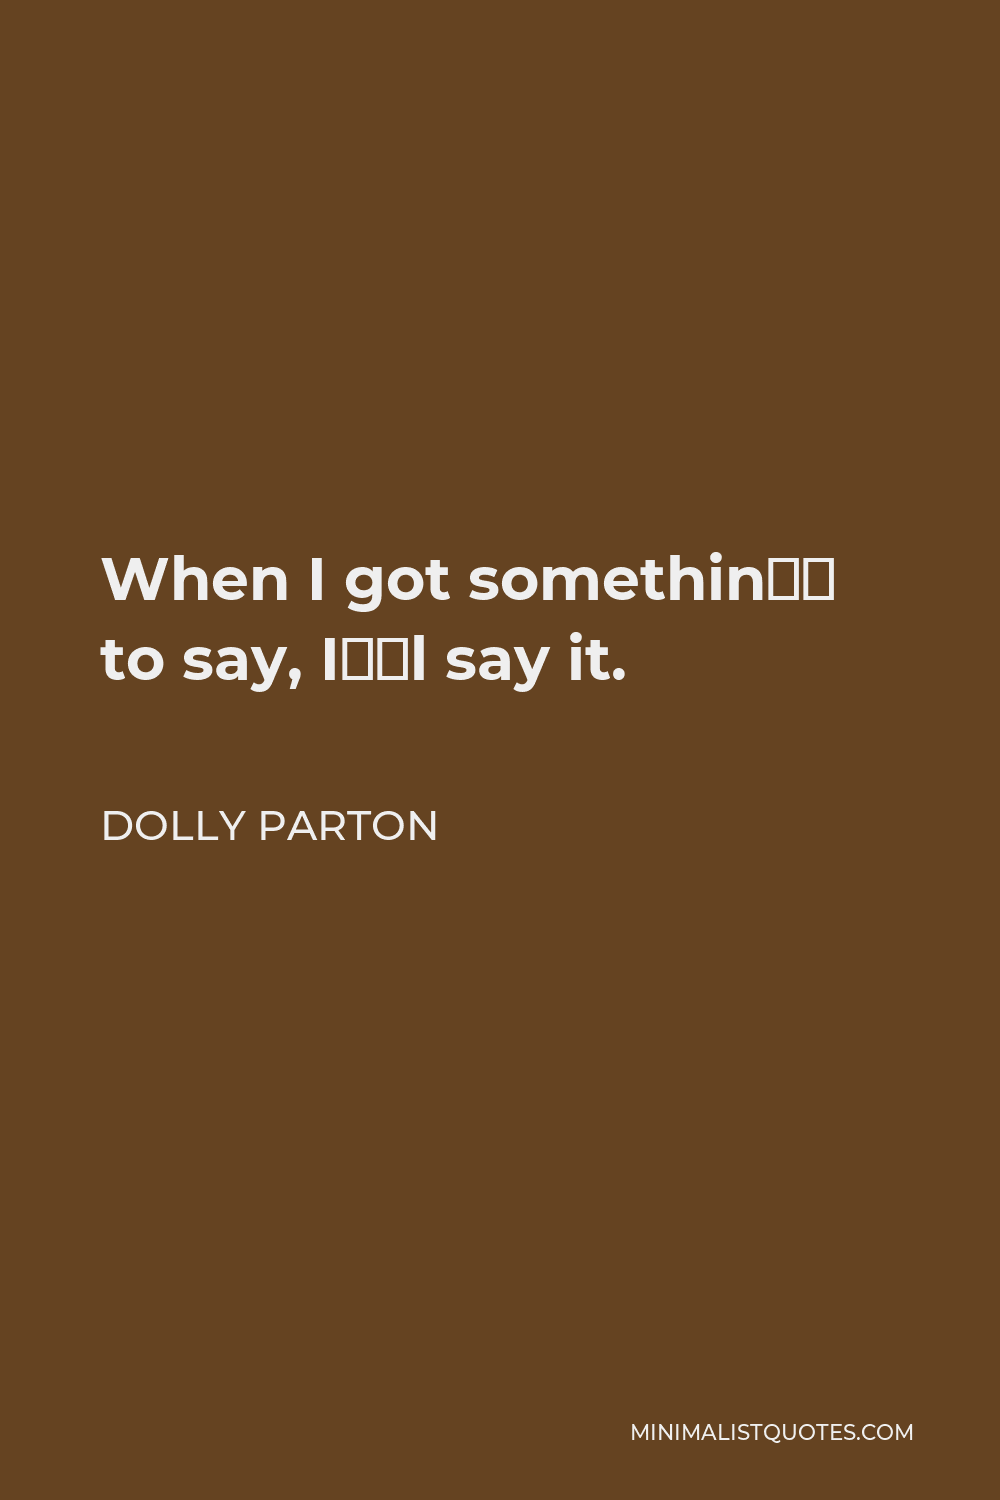 Dolly Parton Quote - When I got somethin’ to say, I’ll say it.